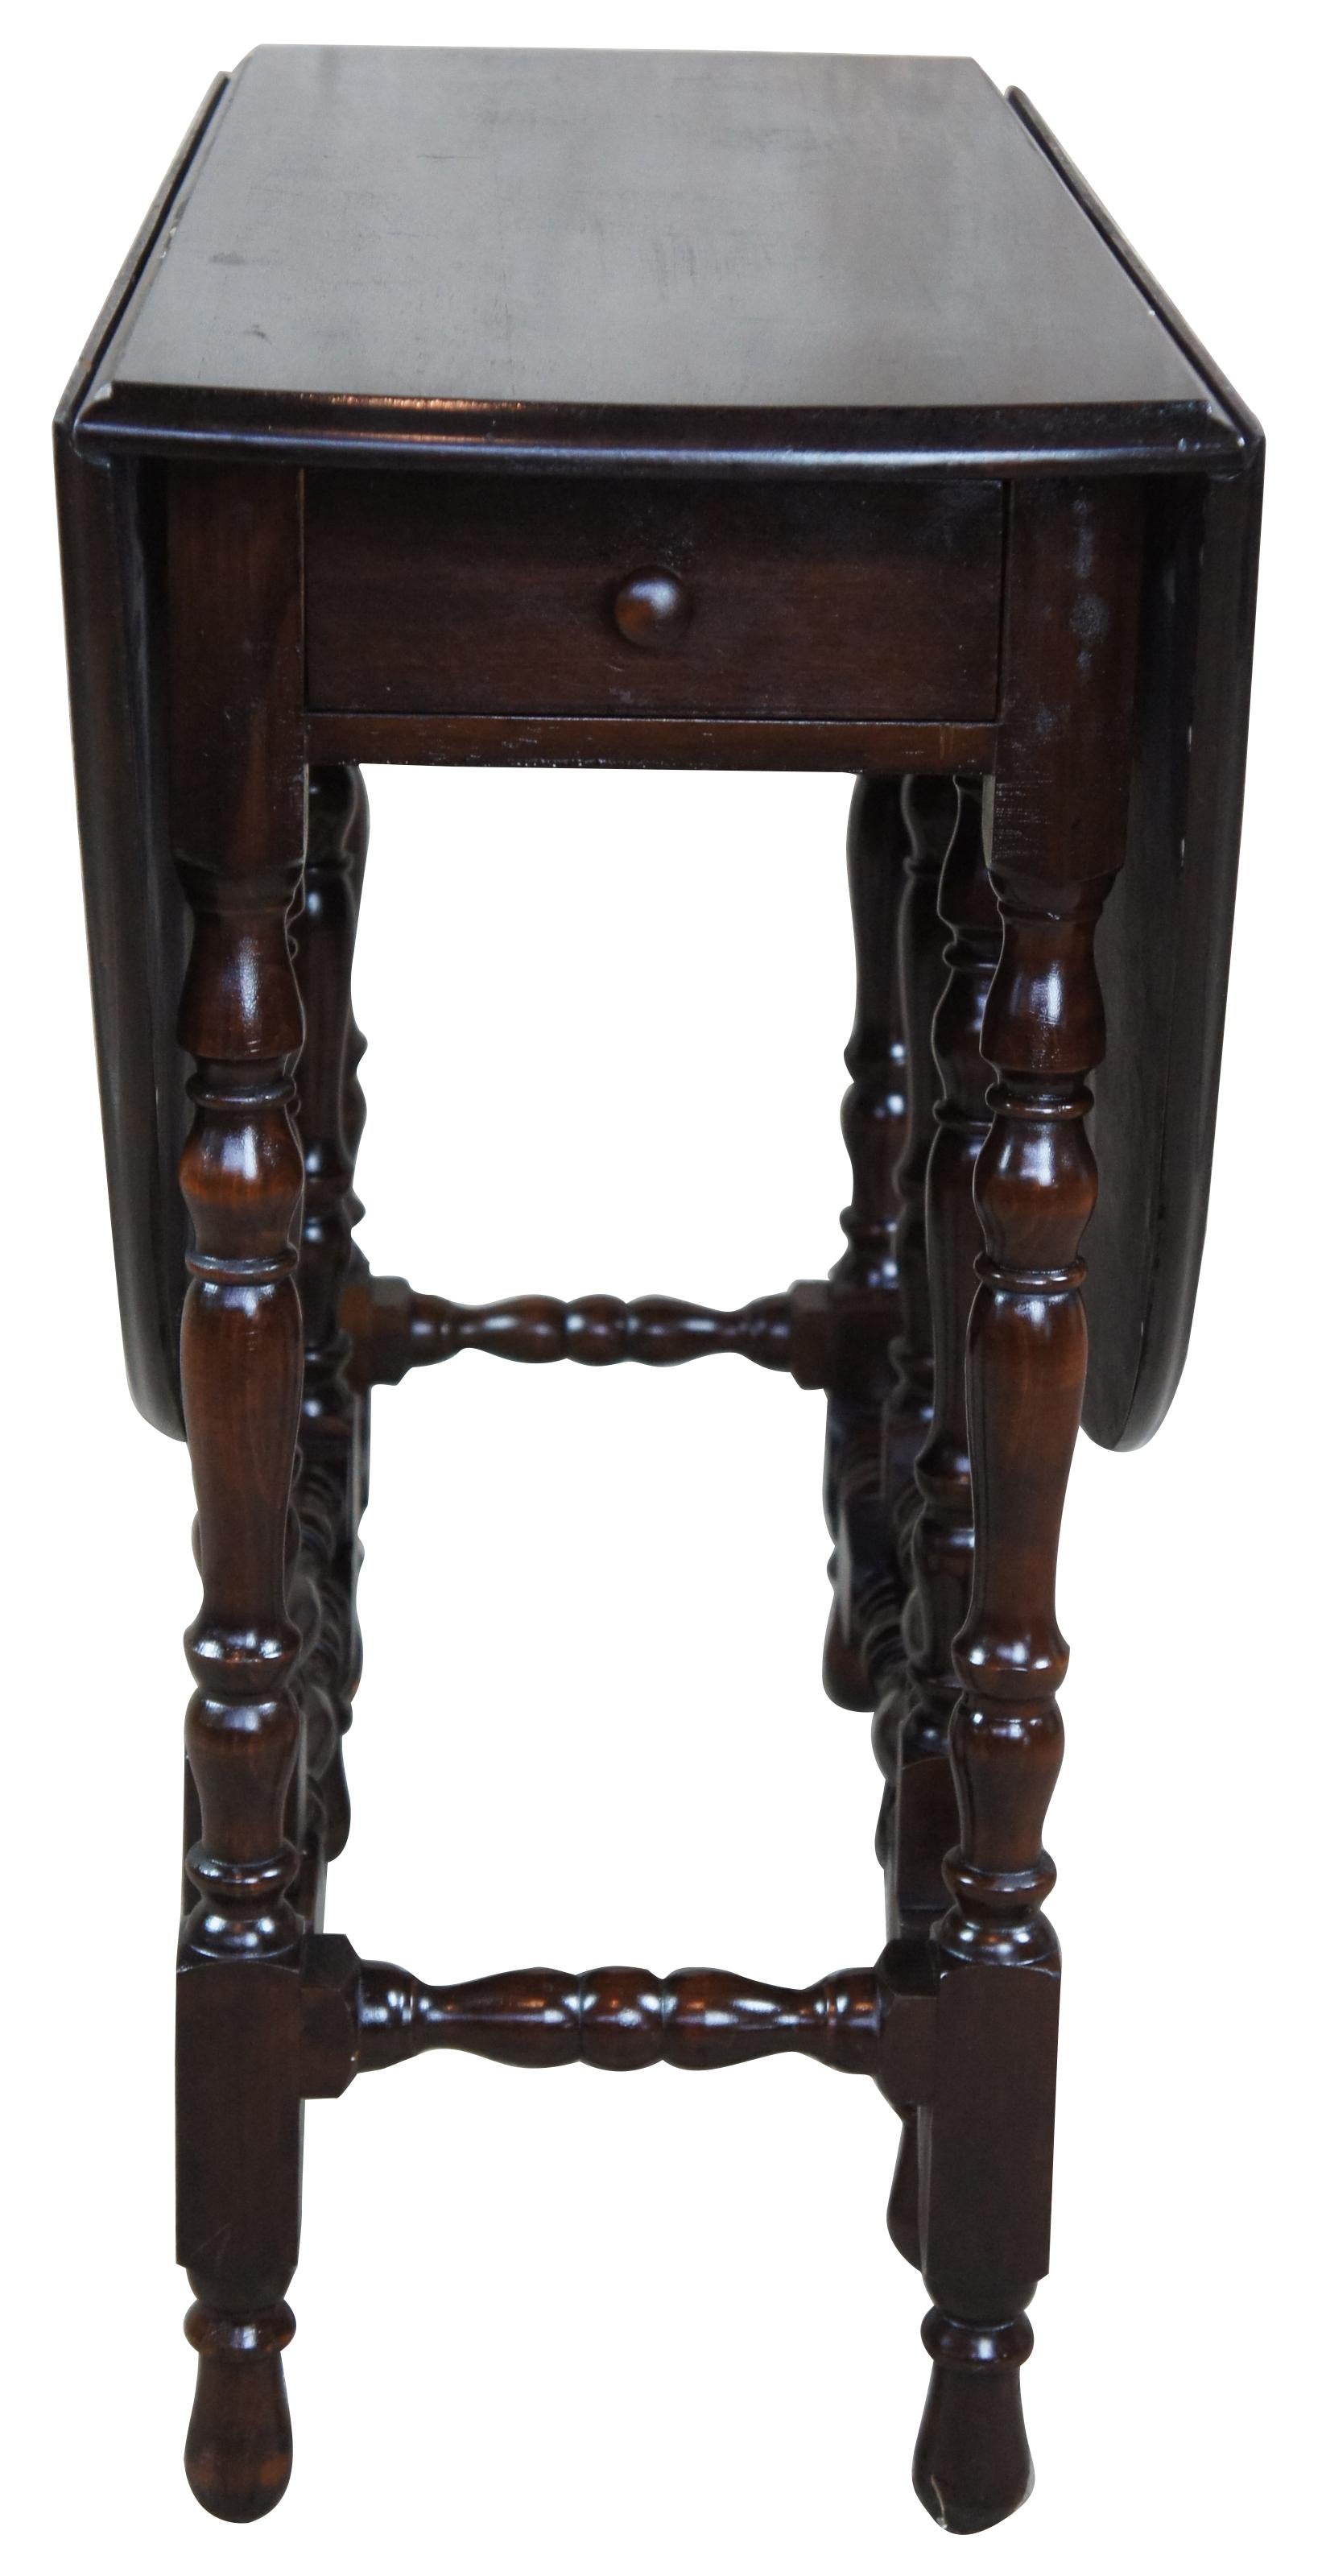 Early 20th century solid walnut drop leaf or gateleg table with drawer. Features turned supports in William & Mary style.
   